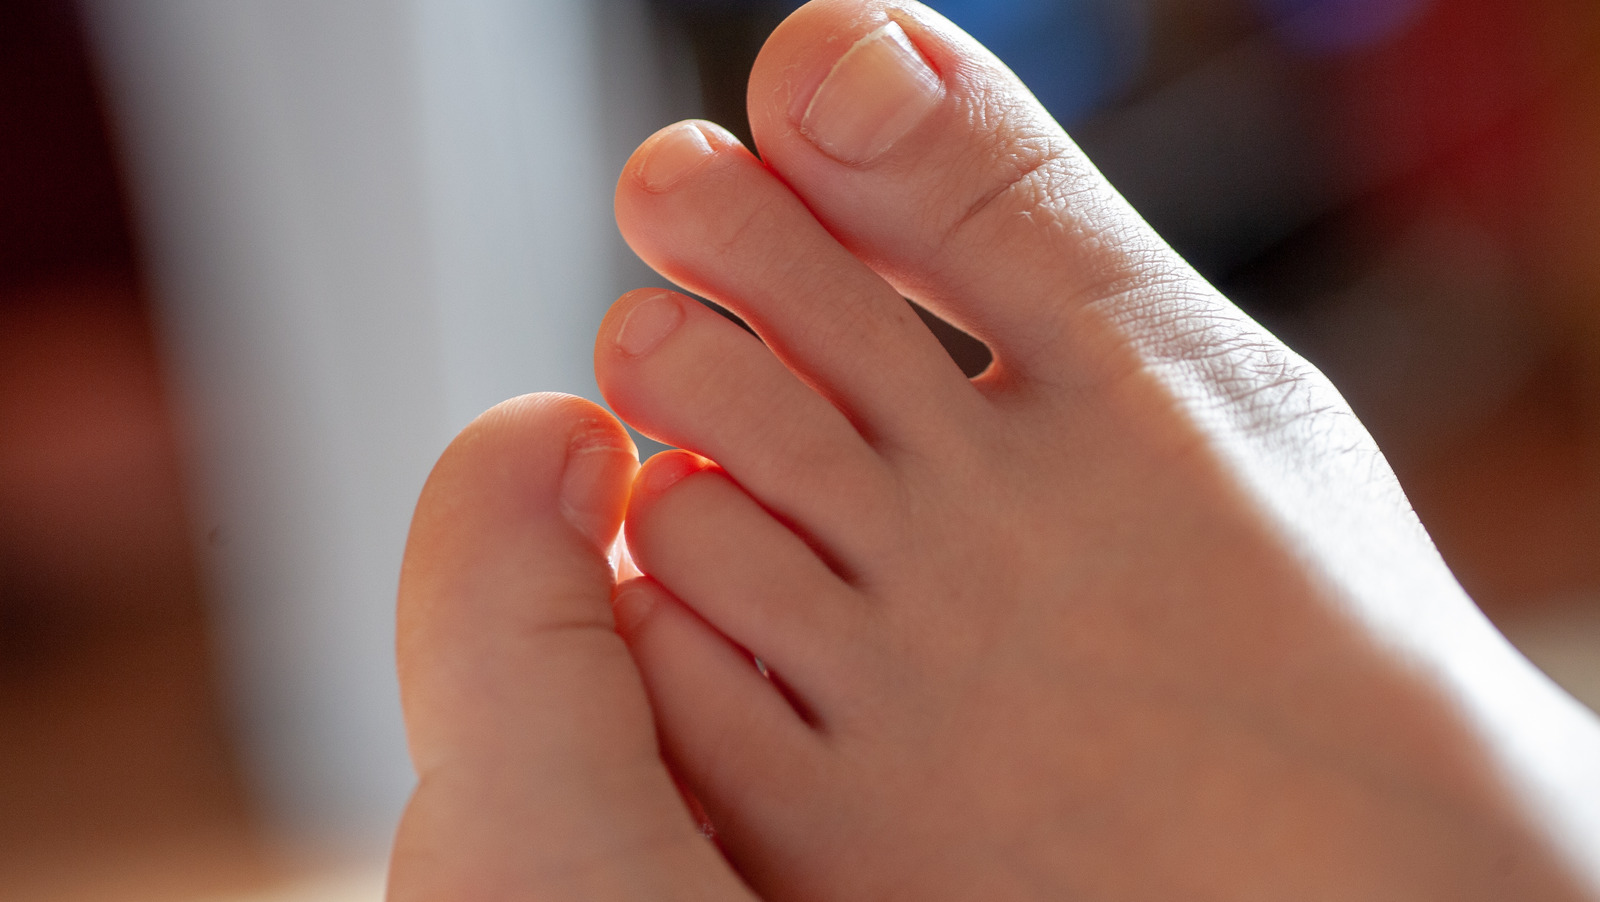 Are You Really an Ultrarunner If You Still Have All Your Toenails?